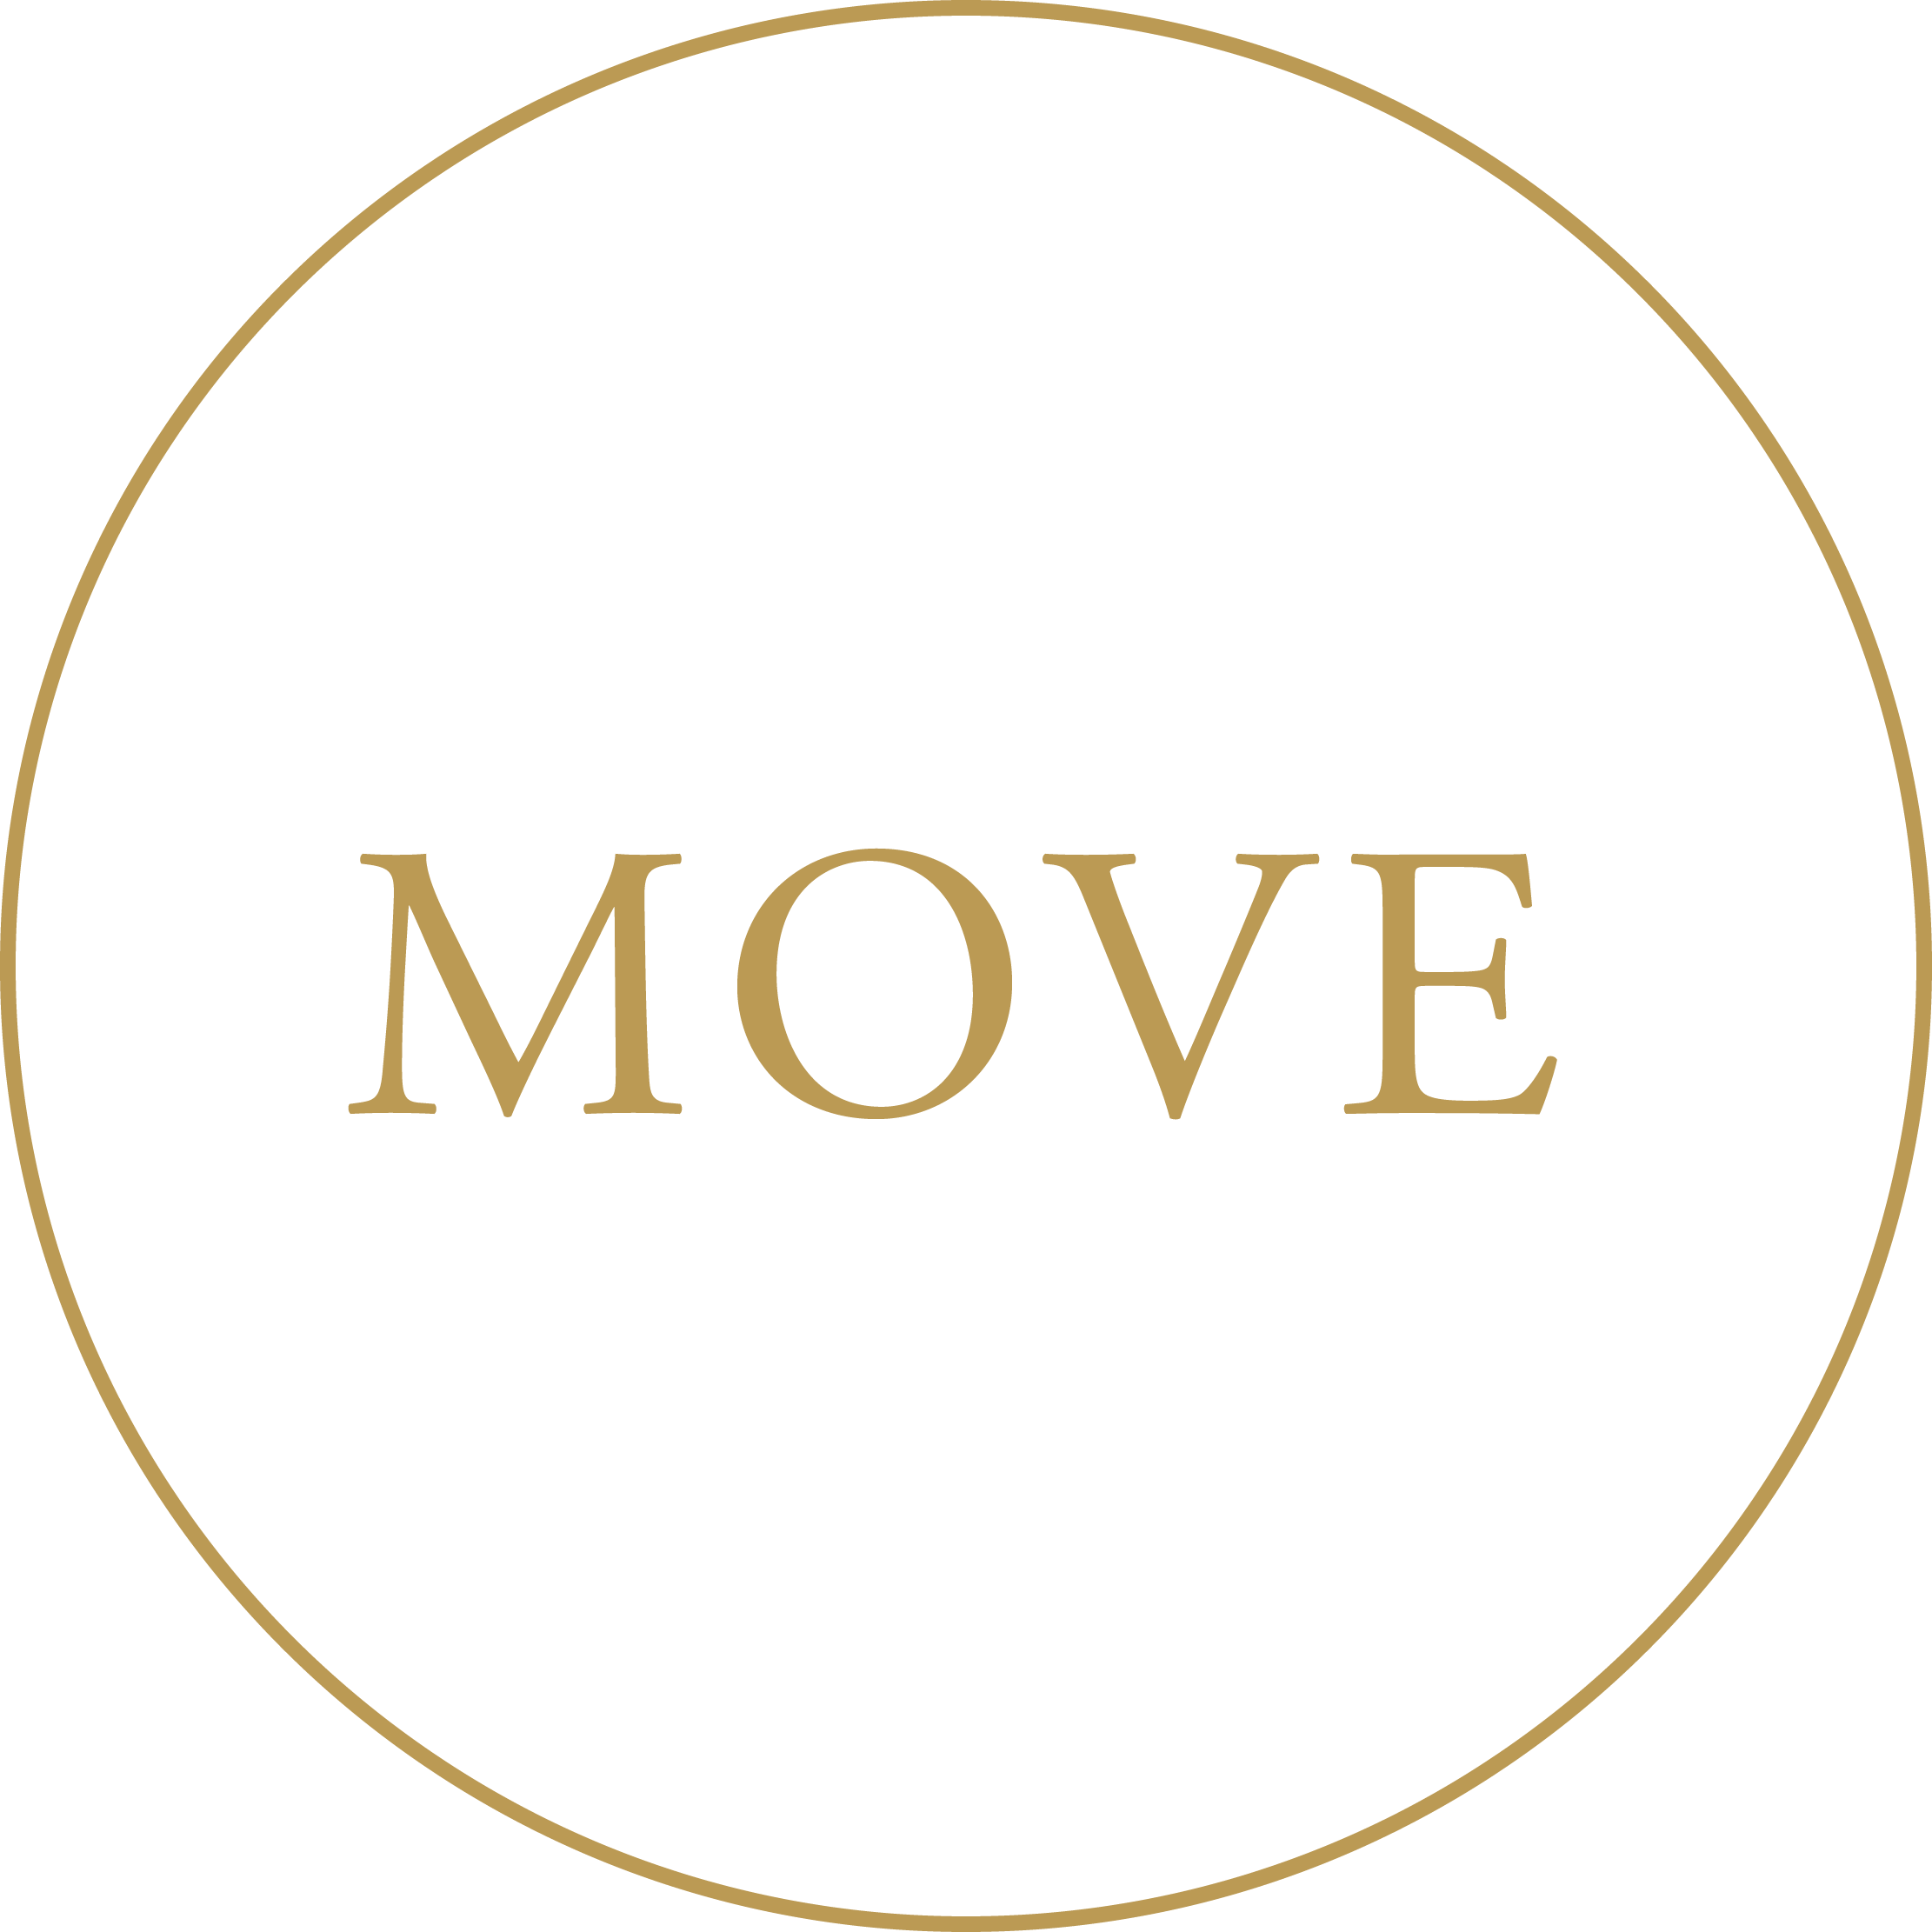 MOVE.png